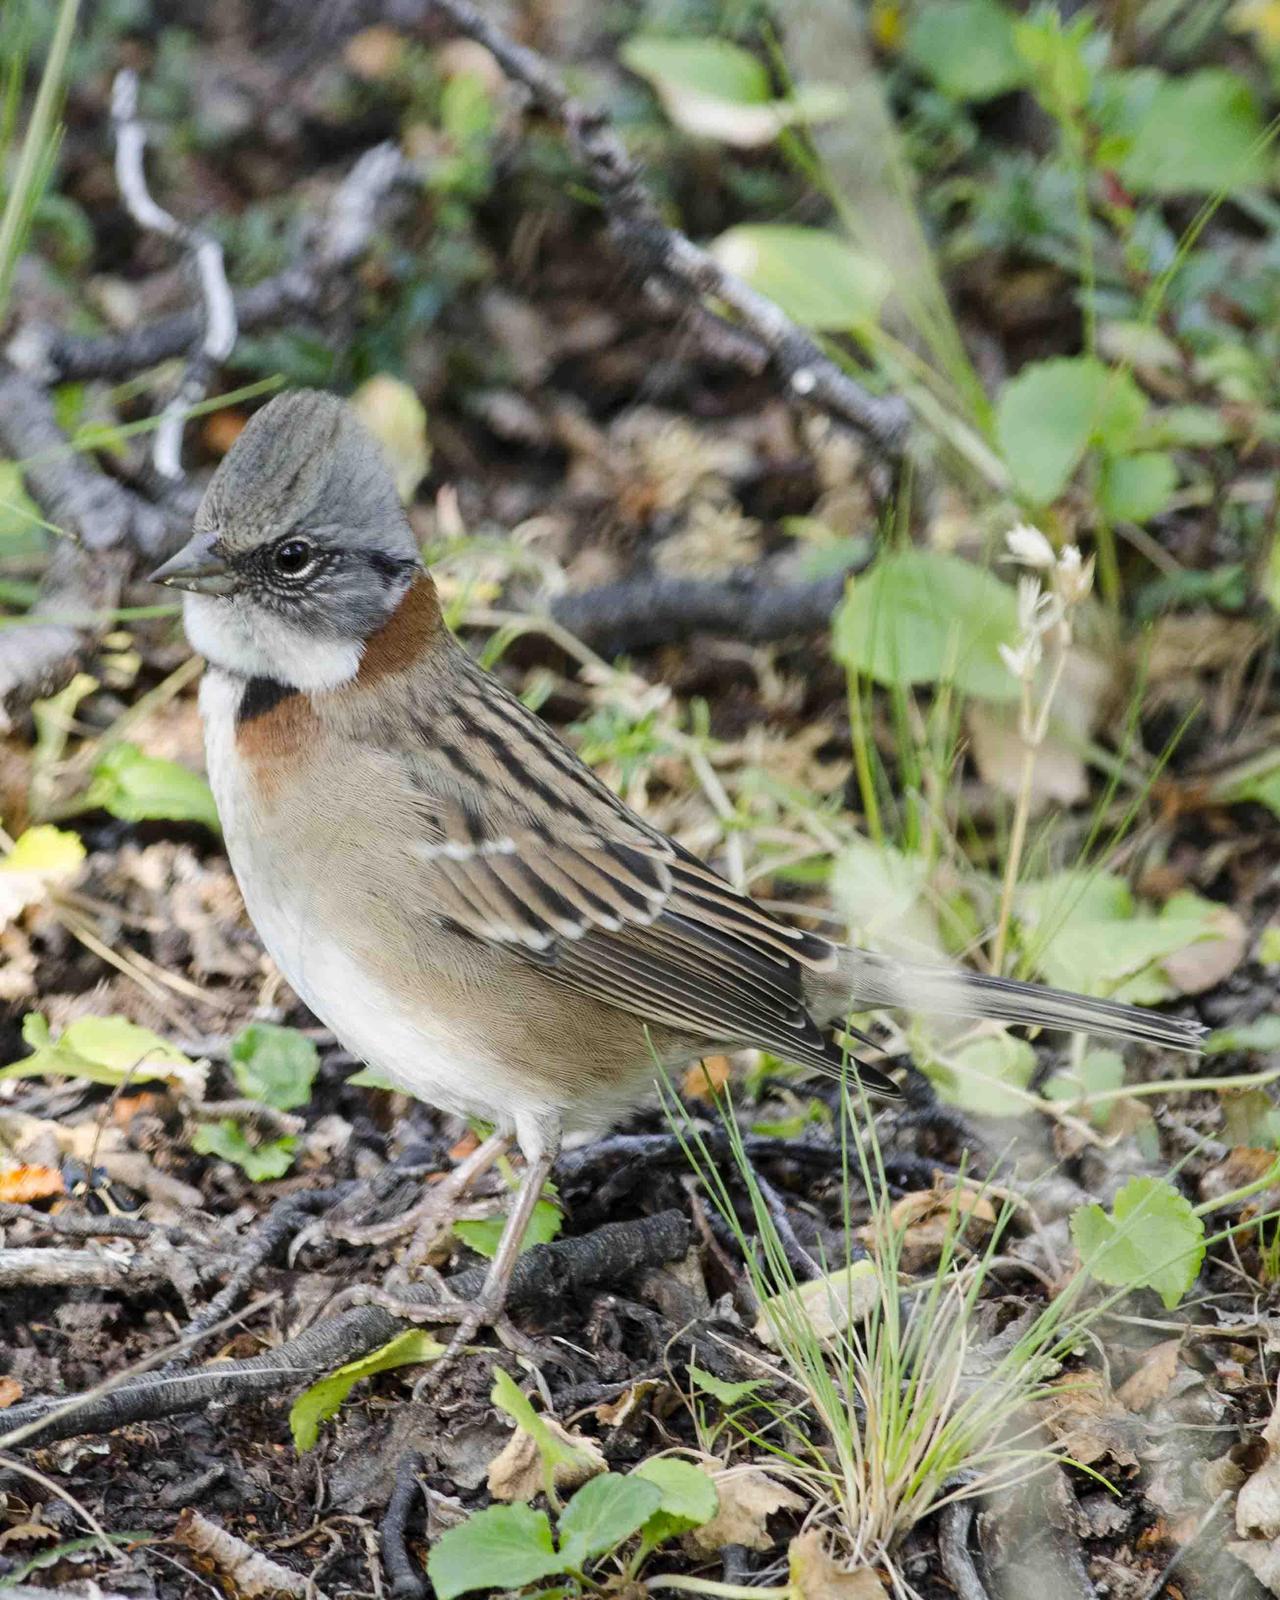 Rufous-collared Sparrow Photo by Bob Hasenick